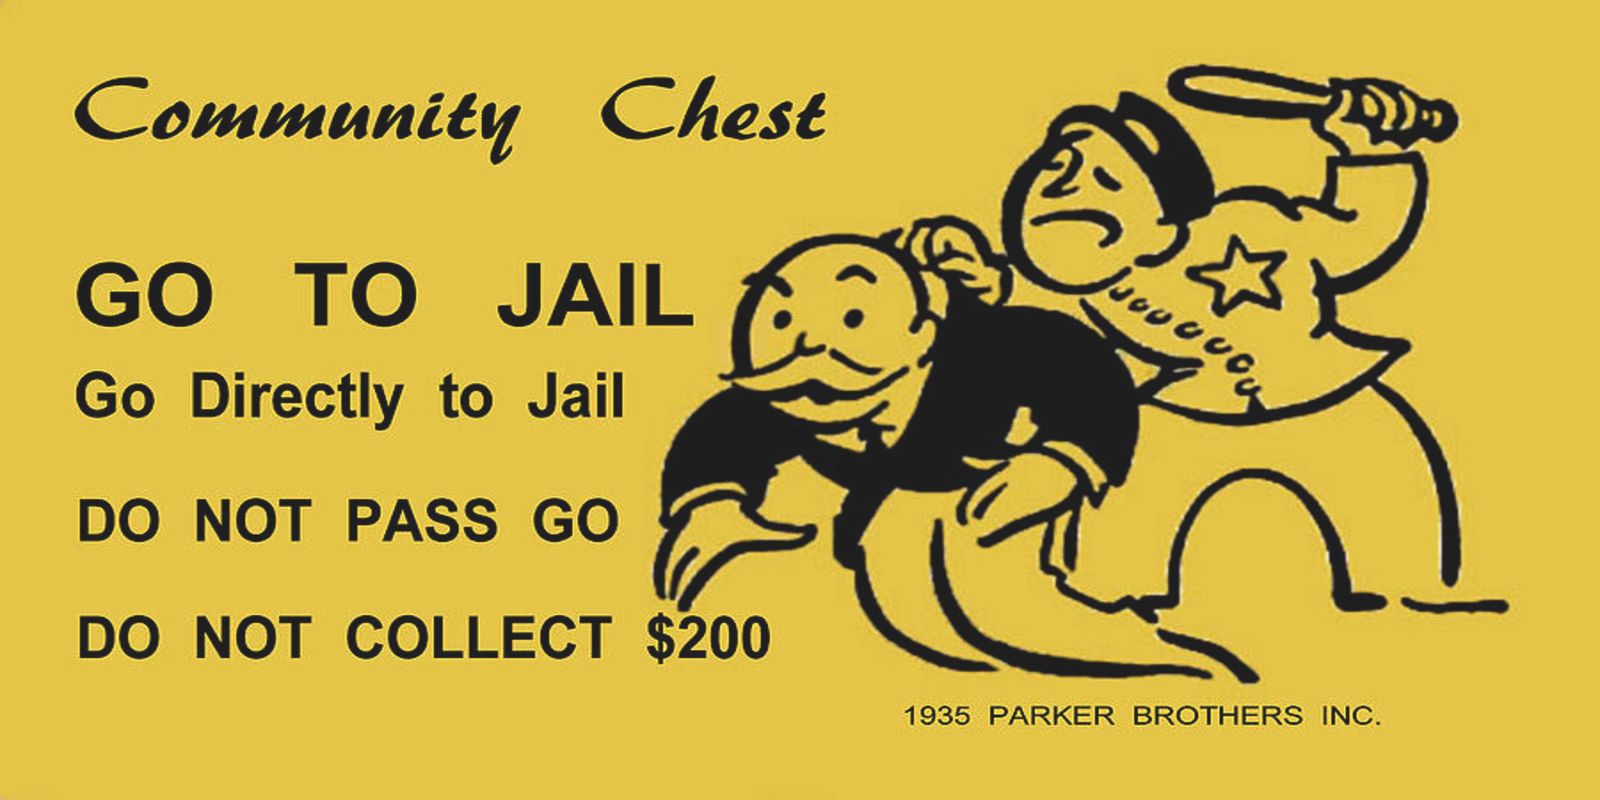 monopoly-jail Community Chest Go To Jail card